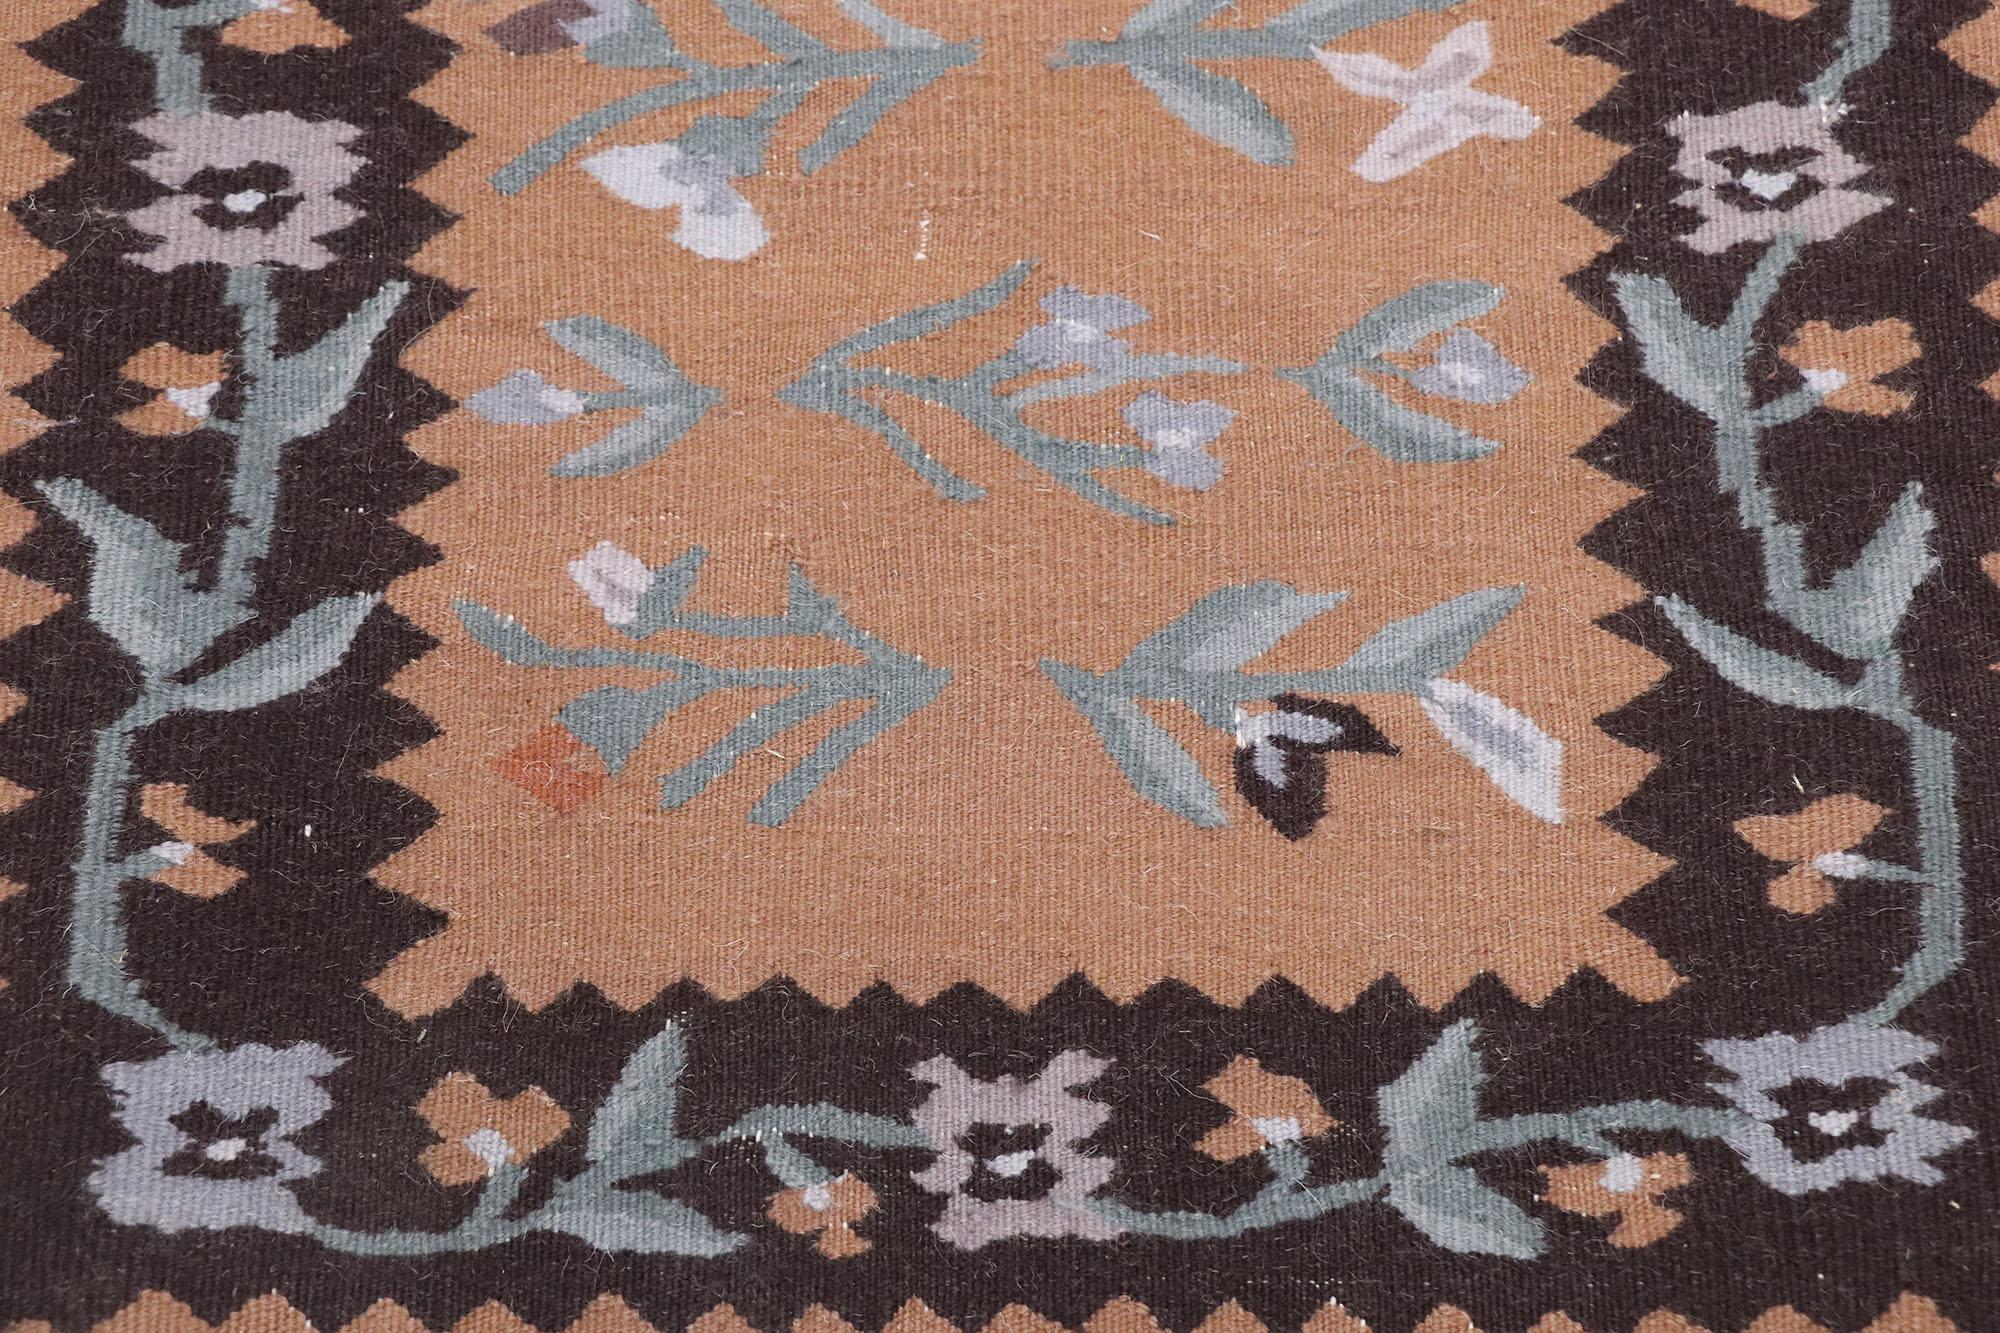 Vintage Persian Shiraz Kilim Rug with Rustic Farmhouse Style In Good Condition For Sale In Dallas, TX